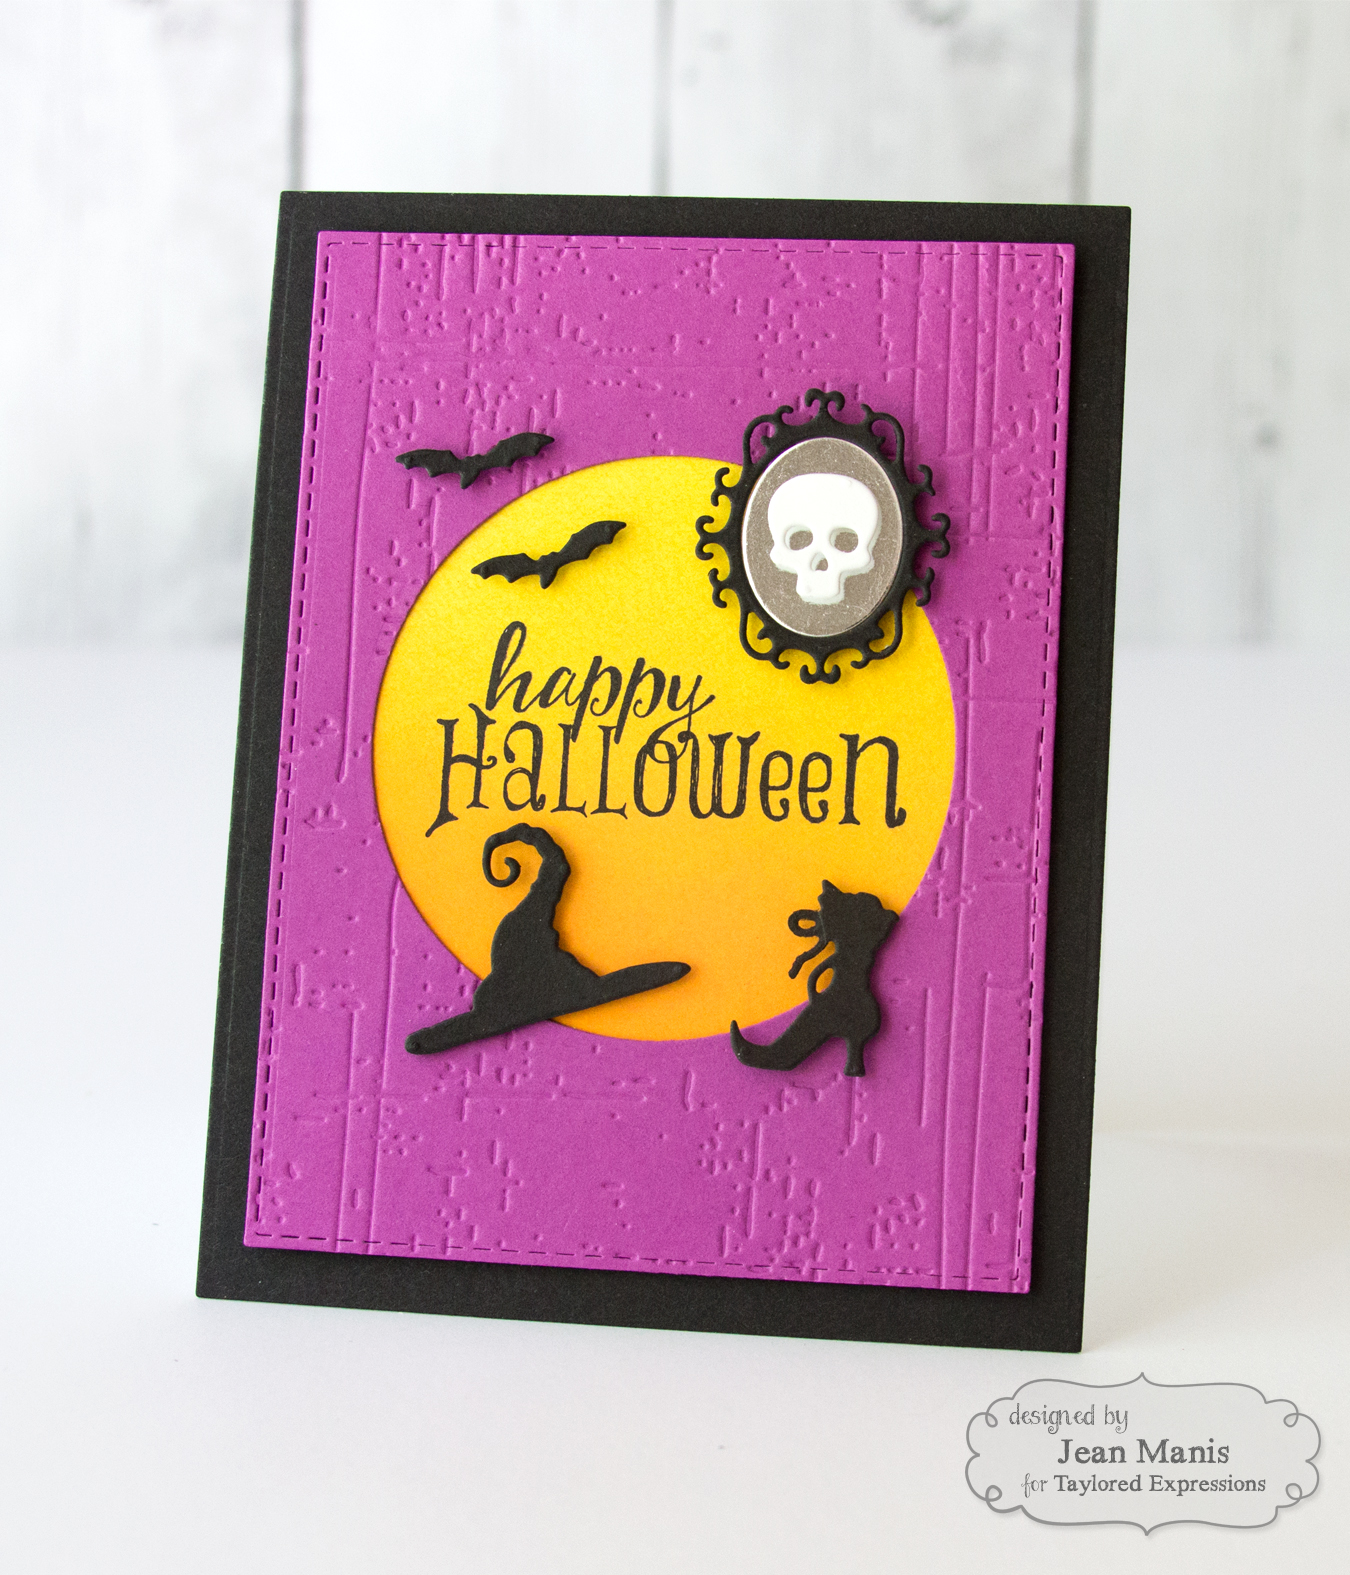 Taylored Expressions Halloween Die-cuts